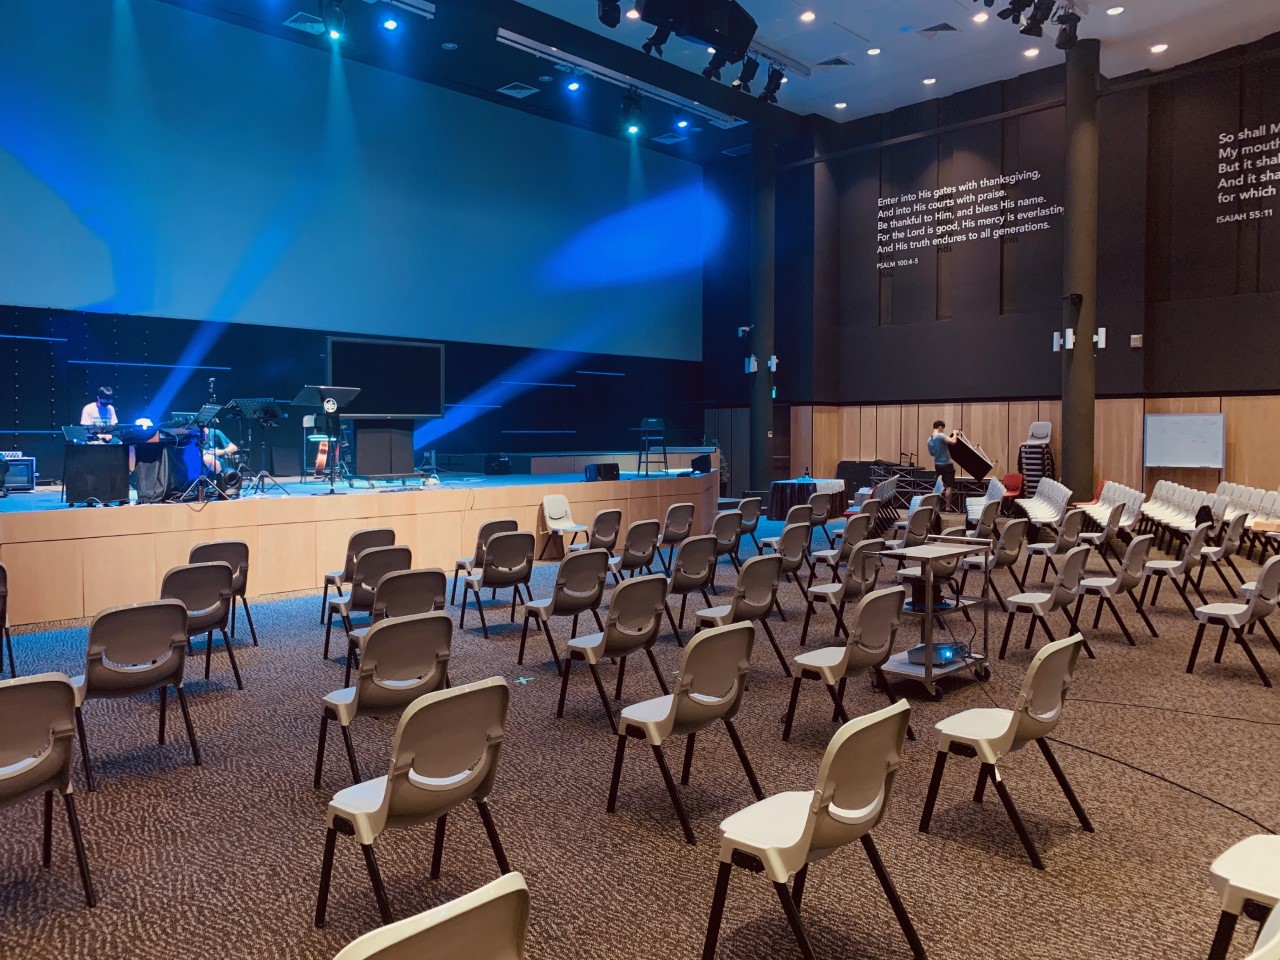 The Sanctuary at Bethesda Bedok-Tampines Church, which is considering how to gradually resume services under the current Phase 2 guidelines. These guidelines include precautionary measures such as a cap of 50 in attendance, no live singing, and safe distancing between seats.